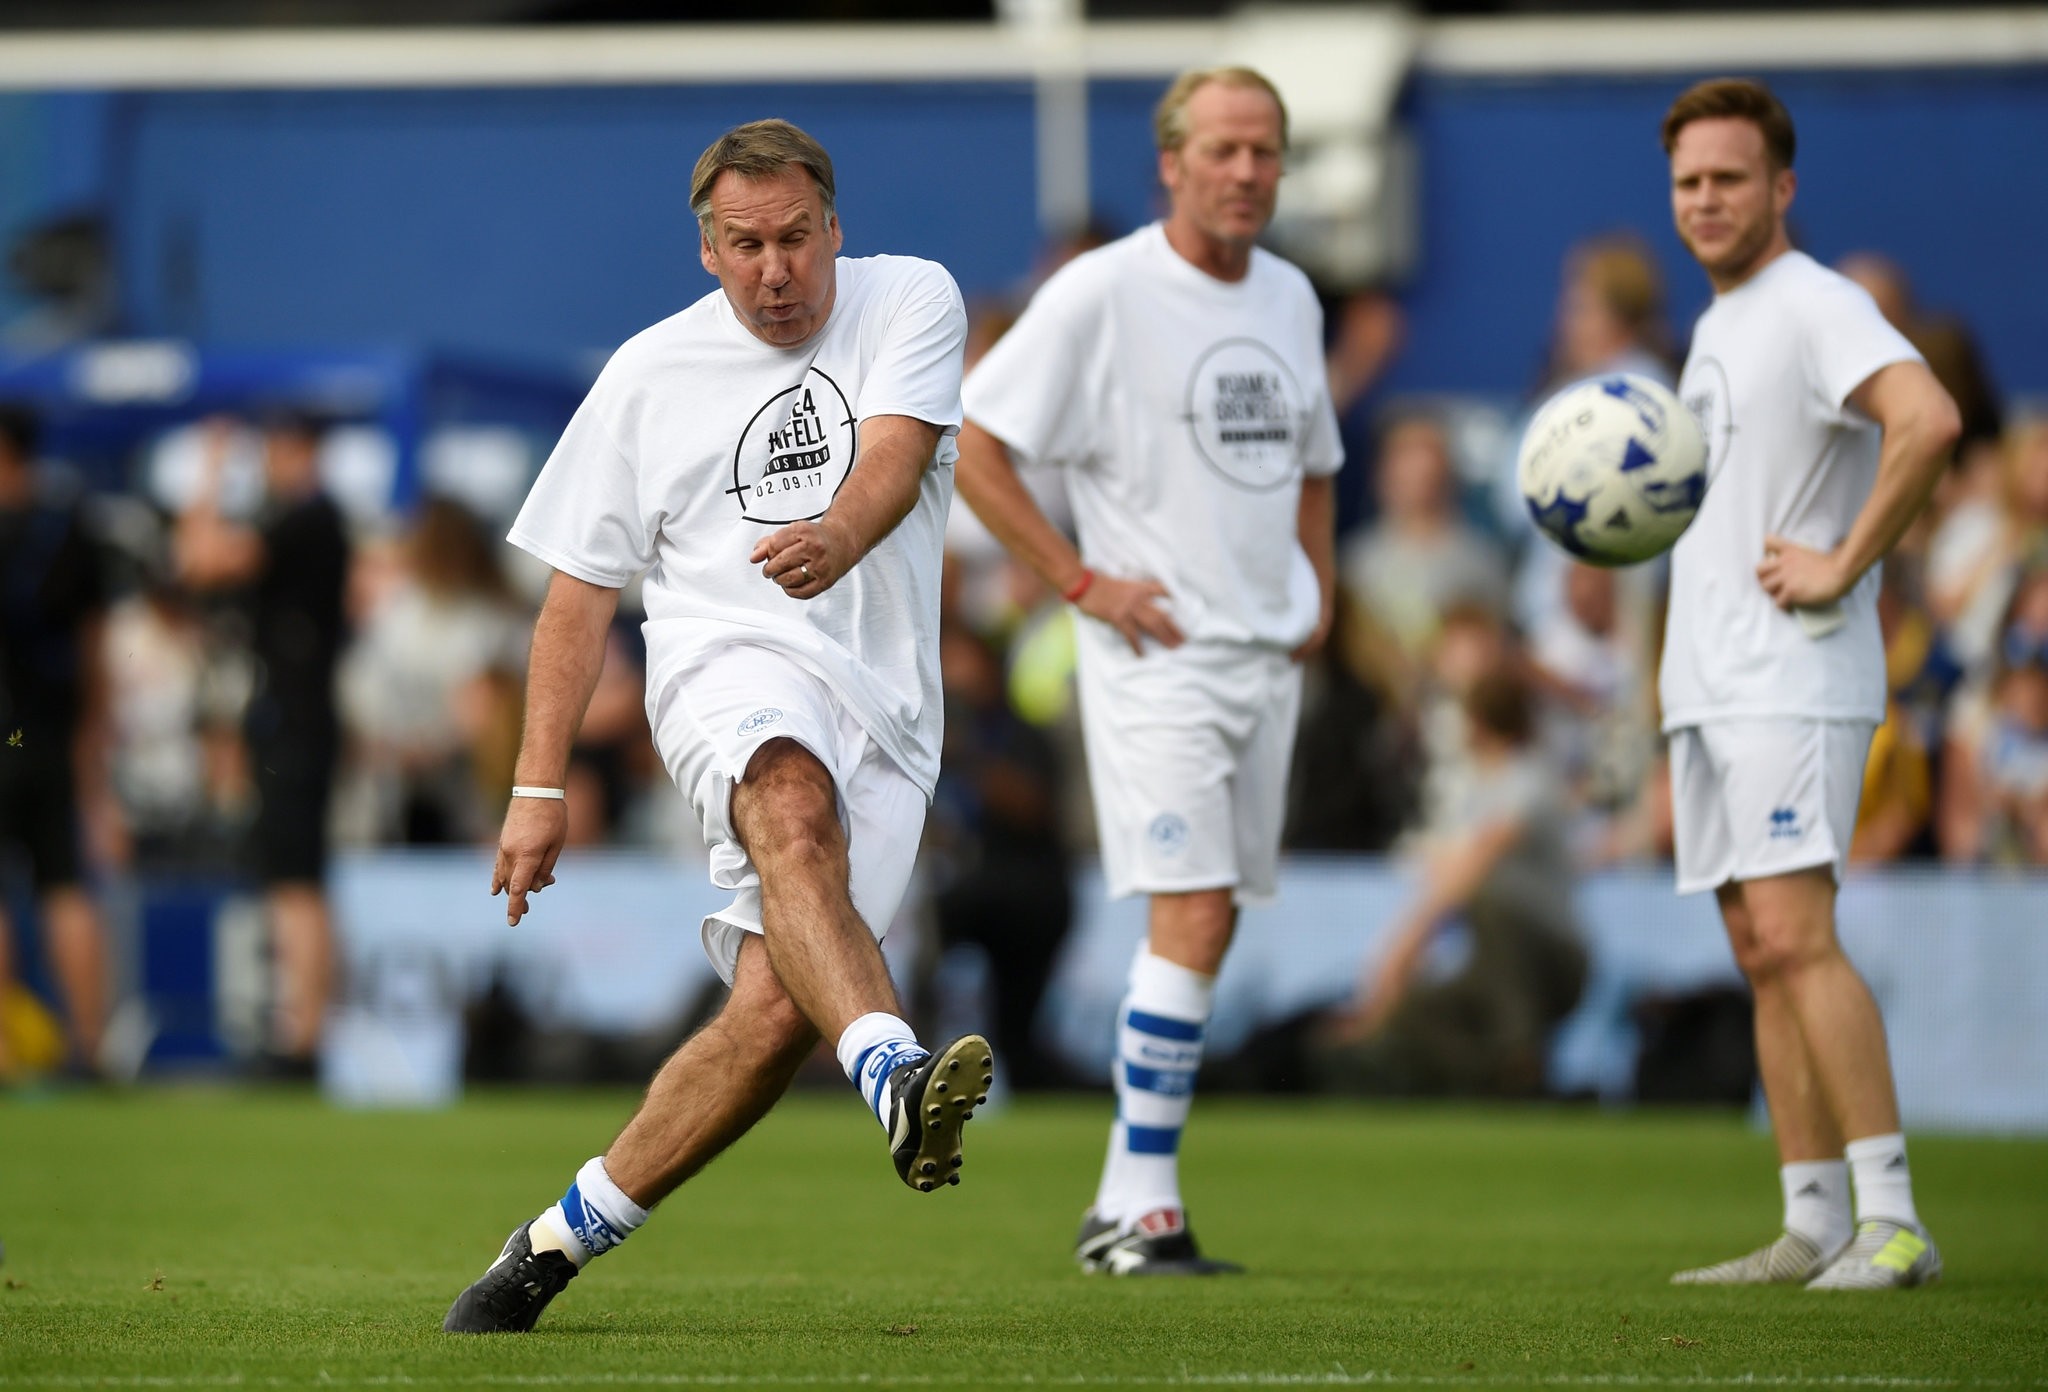 Celebs play charity match to aid Grenfell fire victims